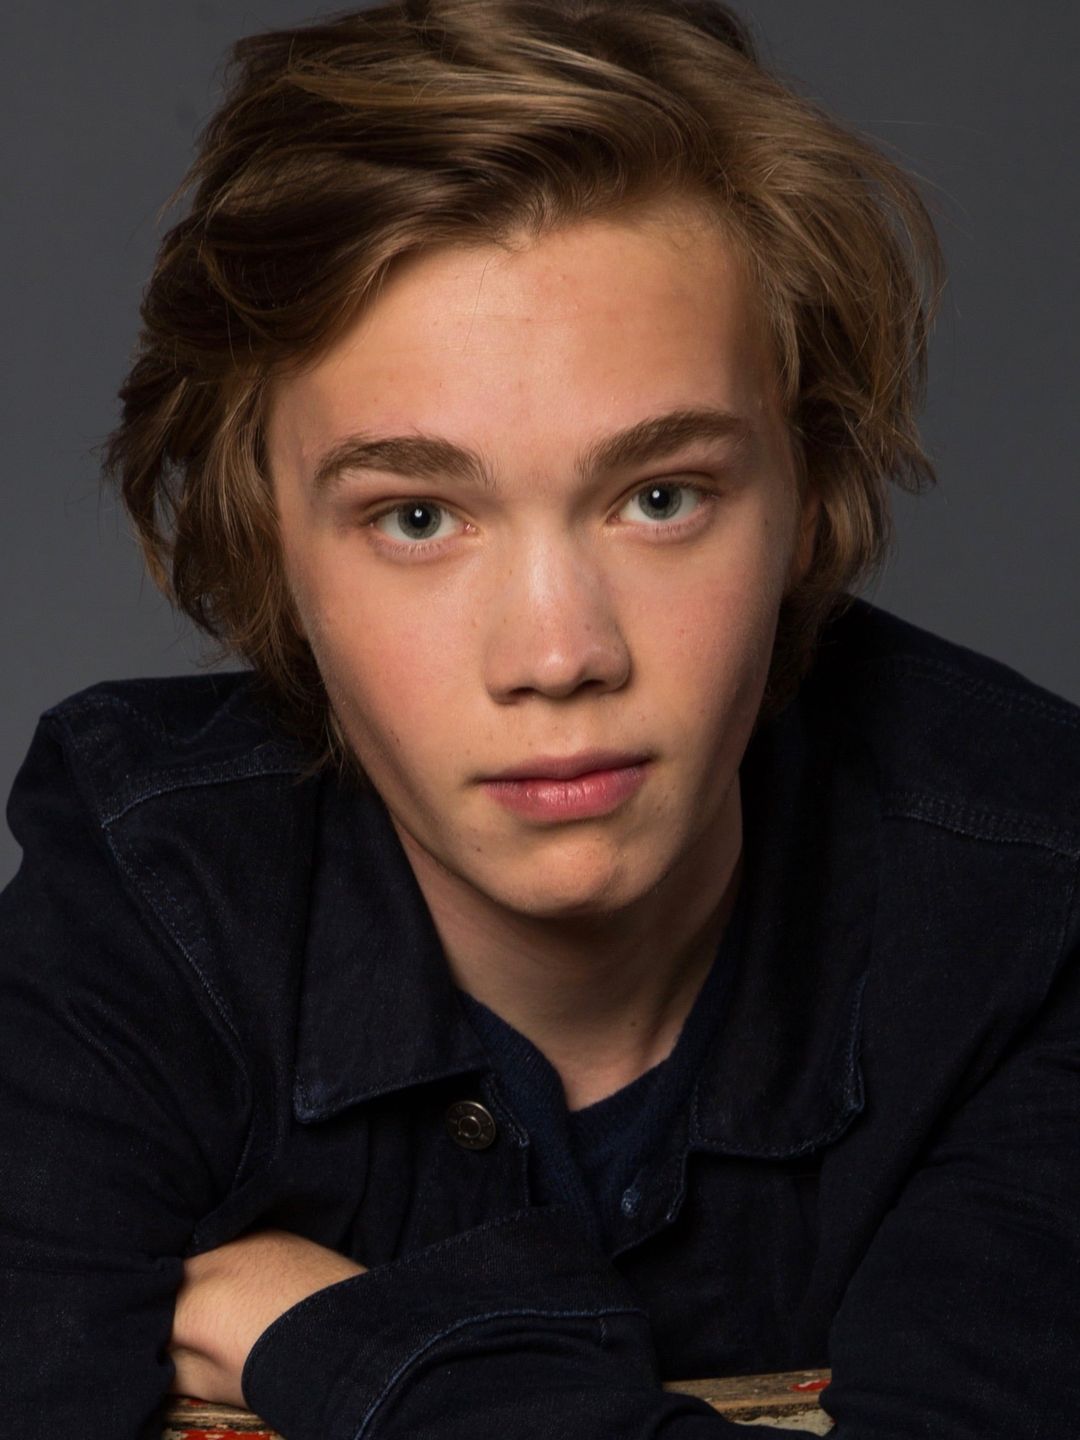 Charlie Plummer young age